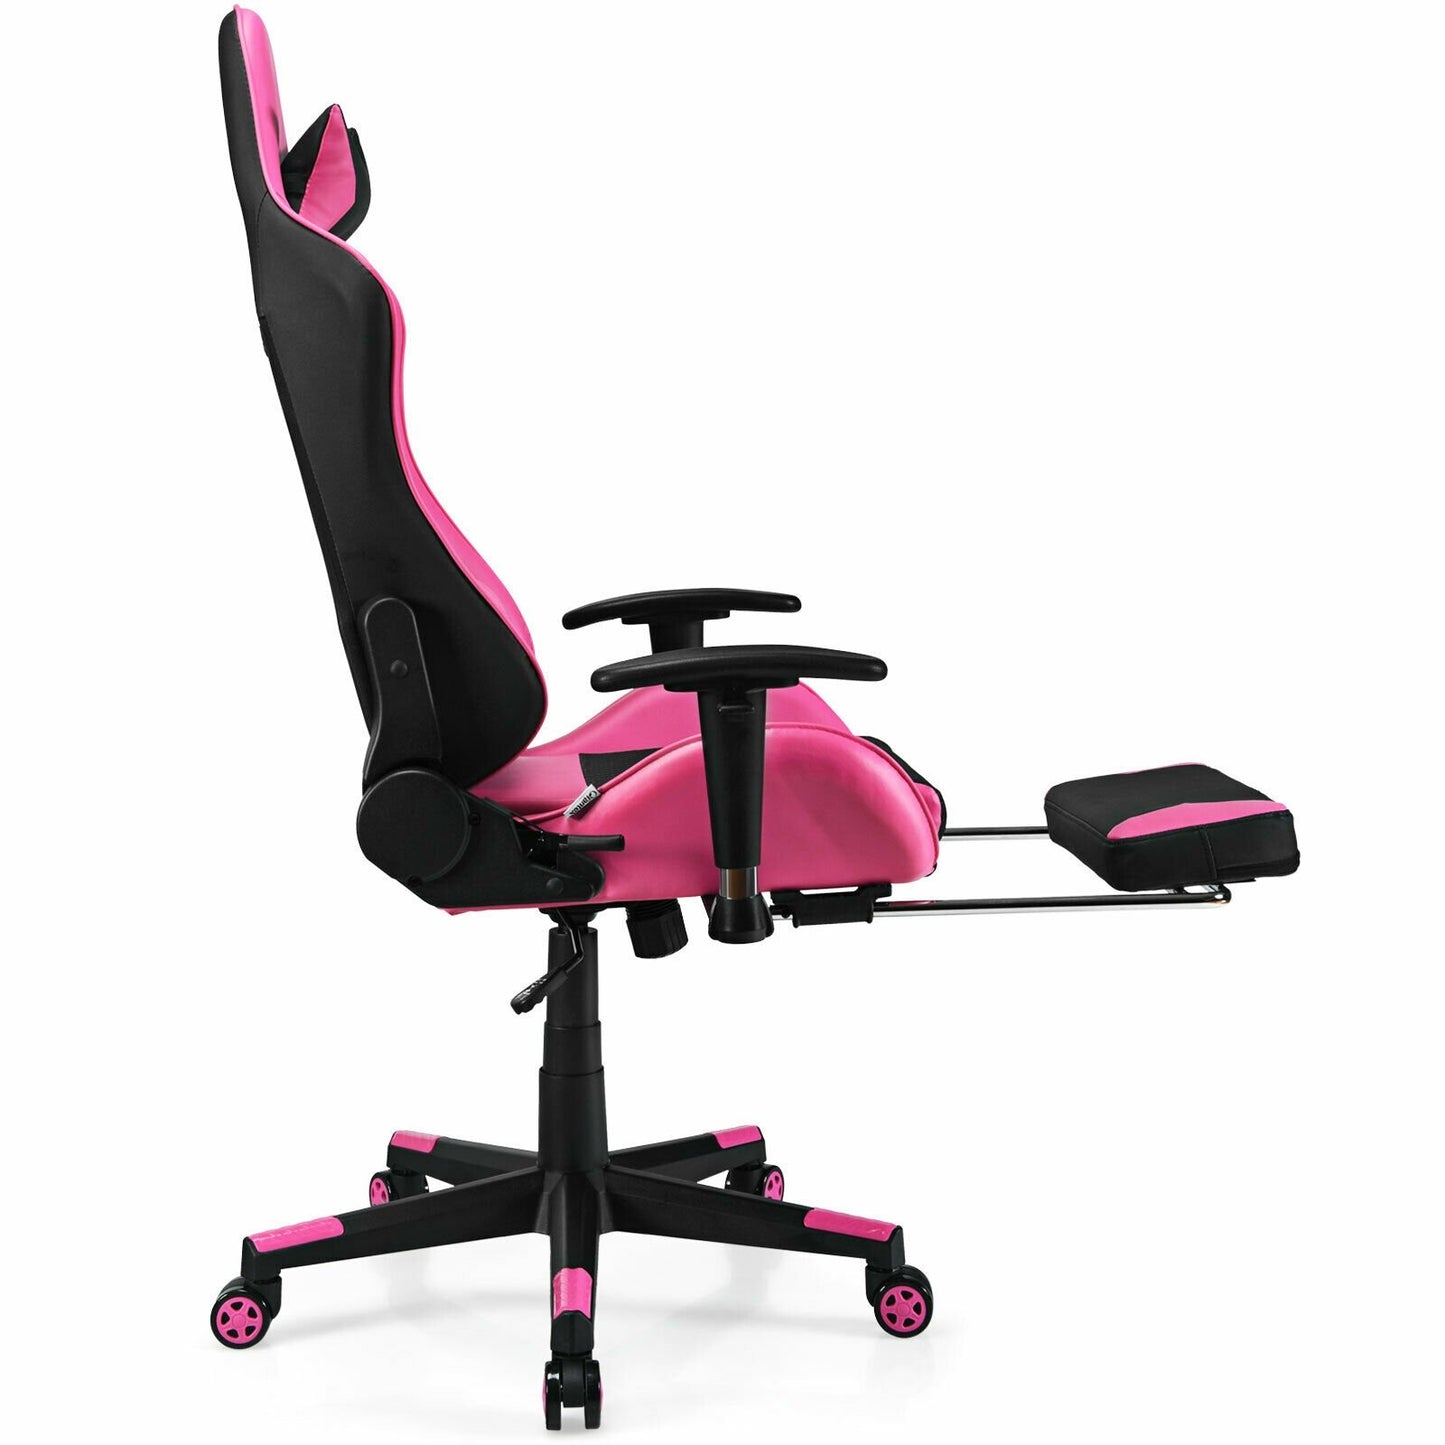 PU Leather Gaming Chair with USB Massage Lumbar Pillow and Footrest, Pink - Gallery Canada